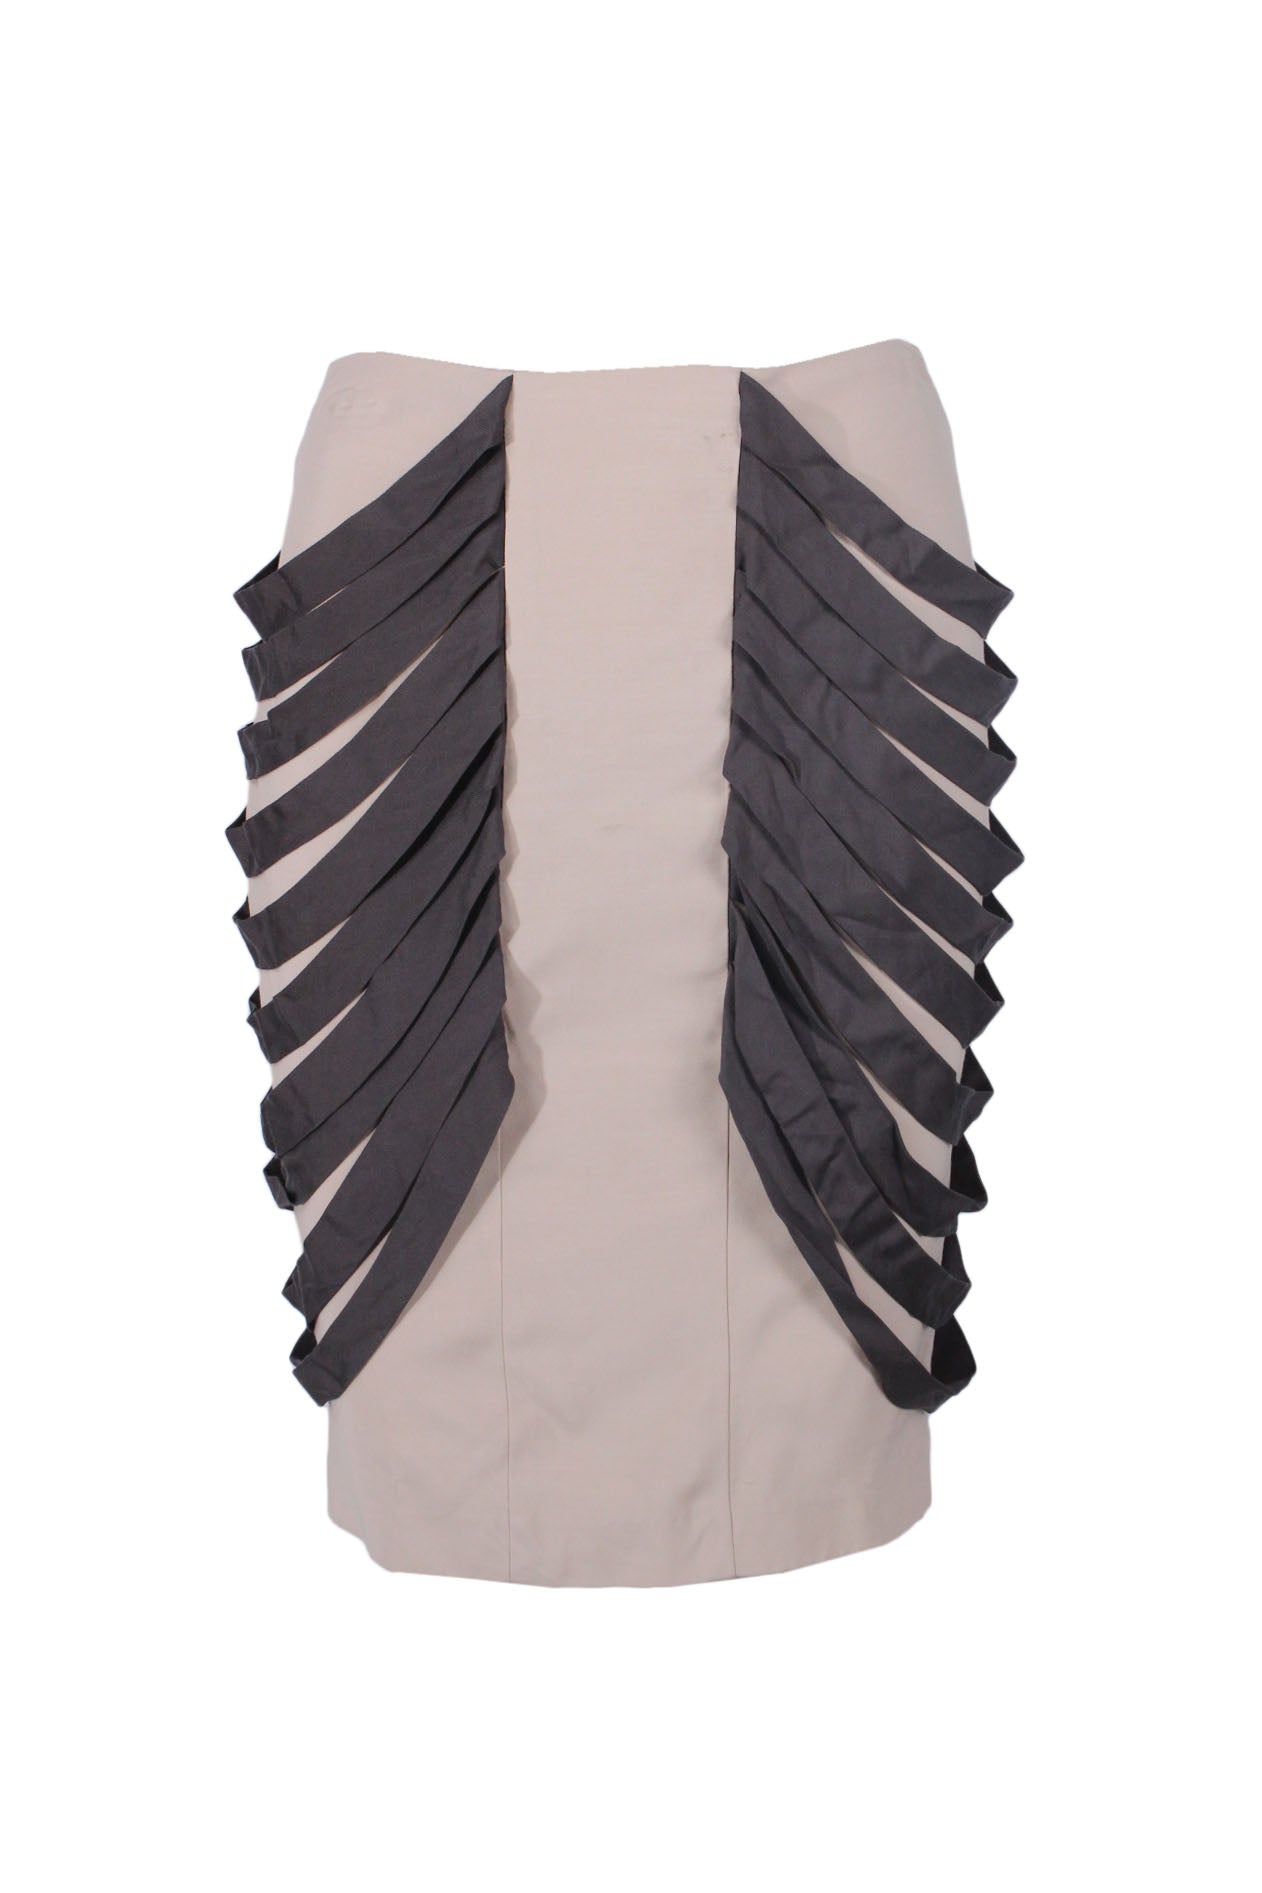 front of  loeffler randall beige and gray midi skirt. features stripes details at sides, straight hem, and knee-length.